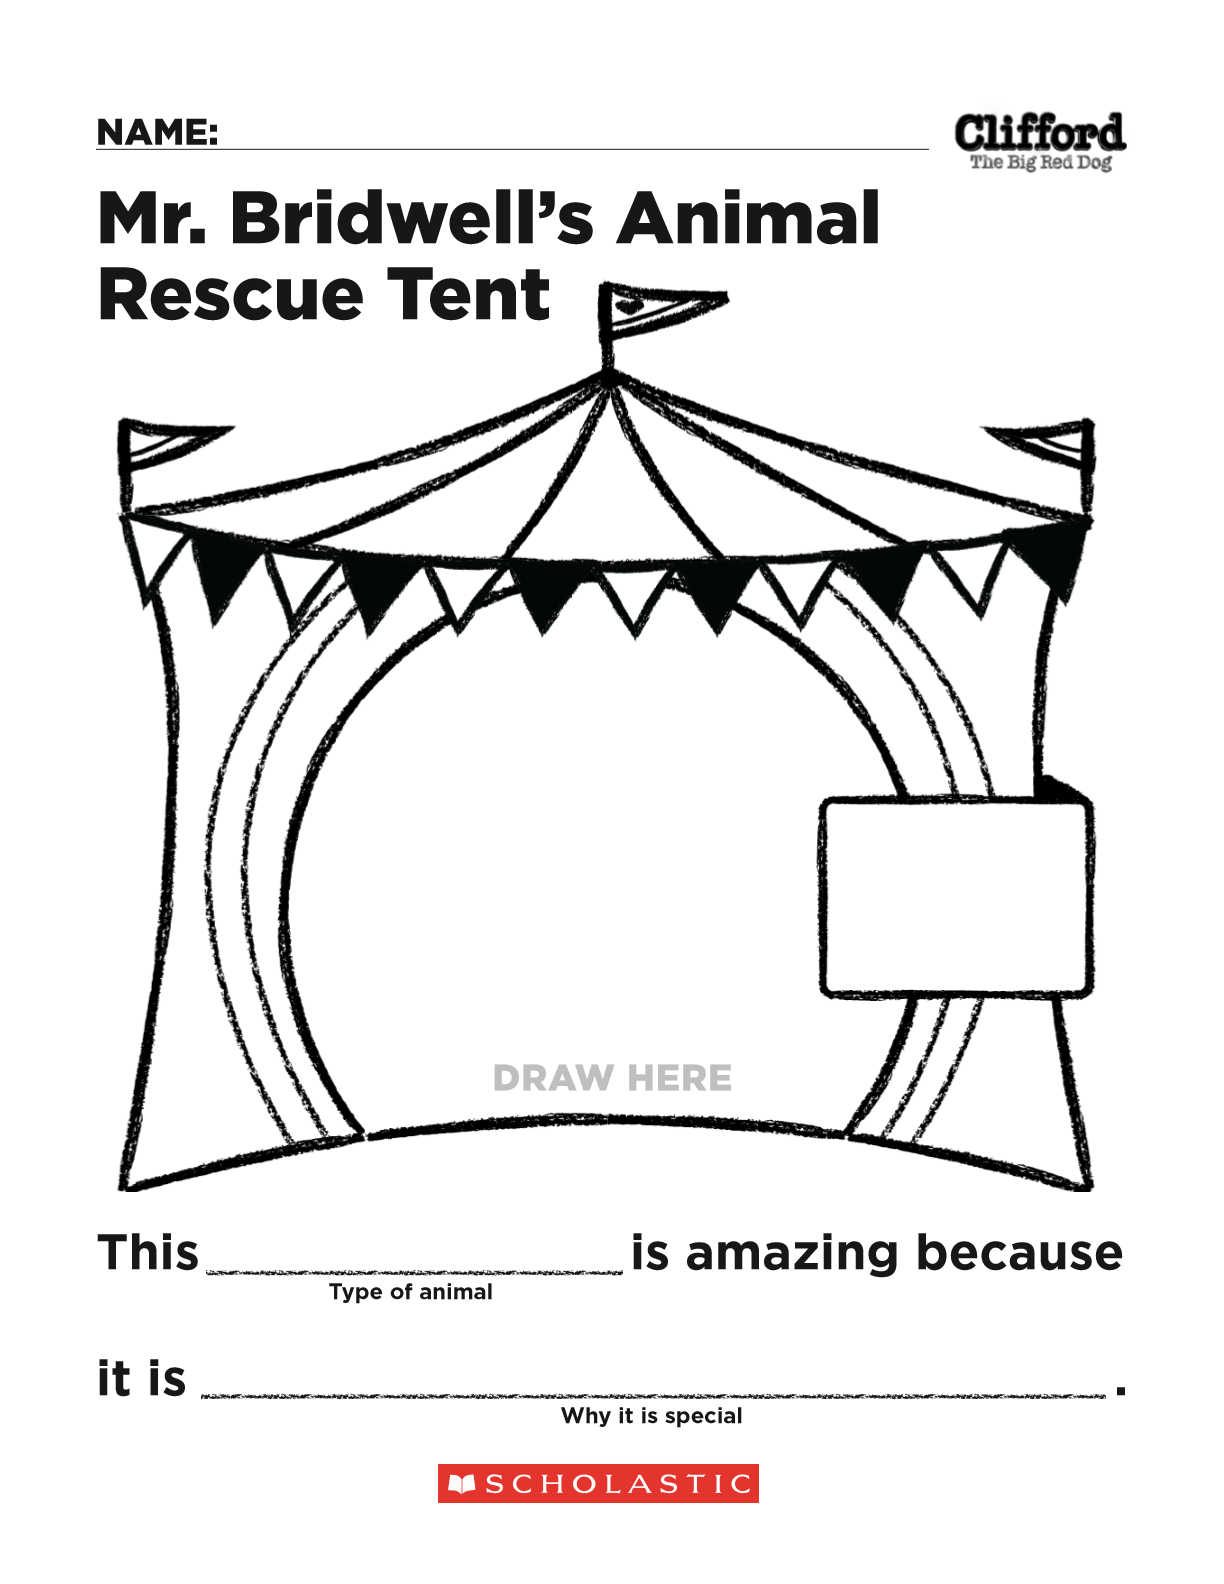 clifford mr birdwell rescue tent coloring page